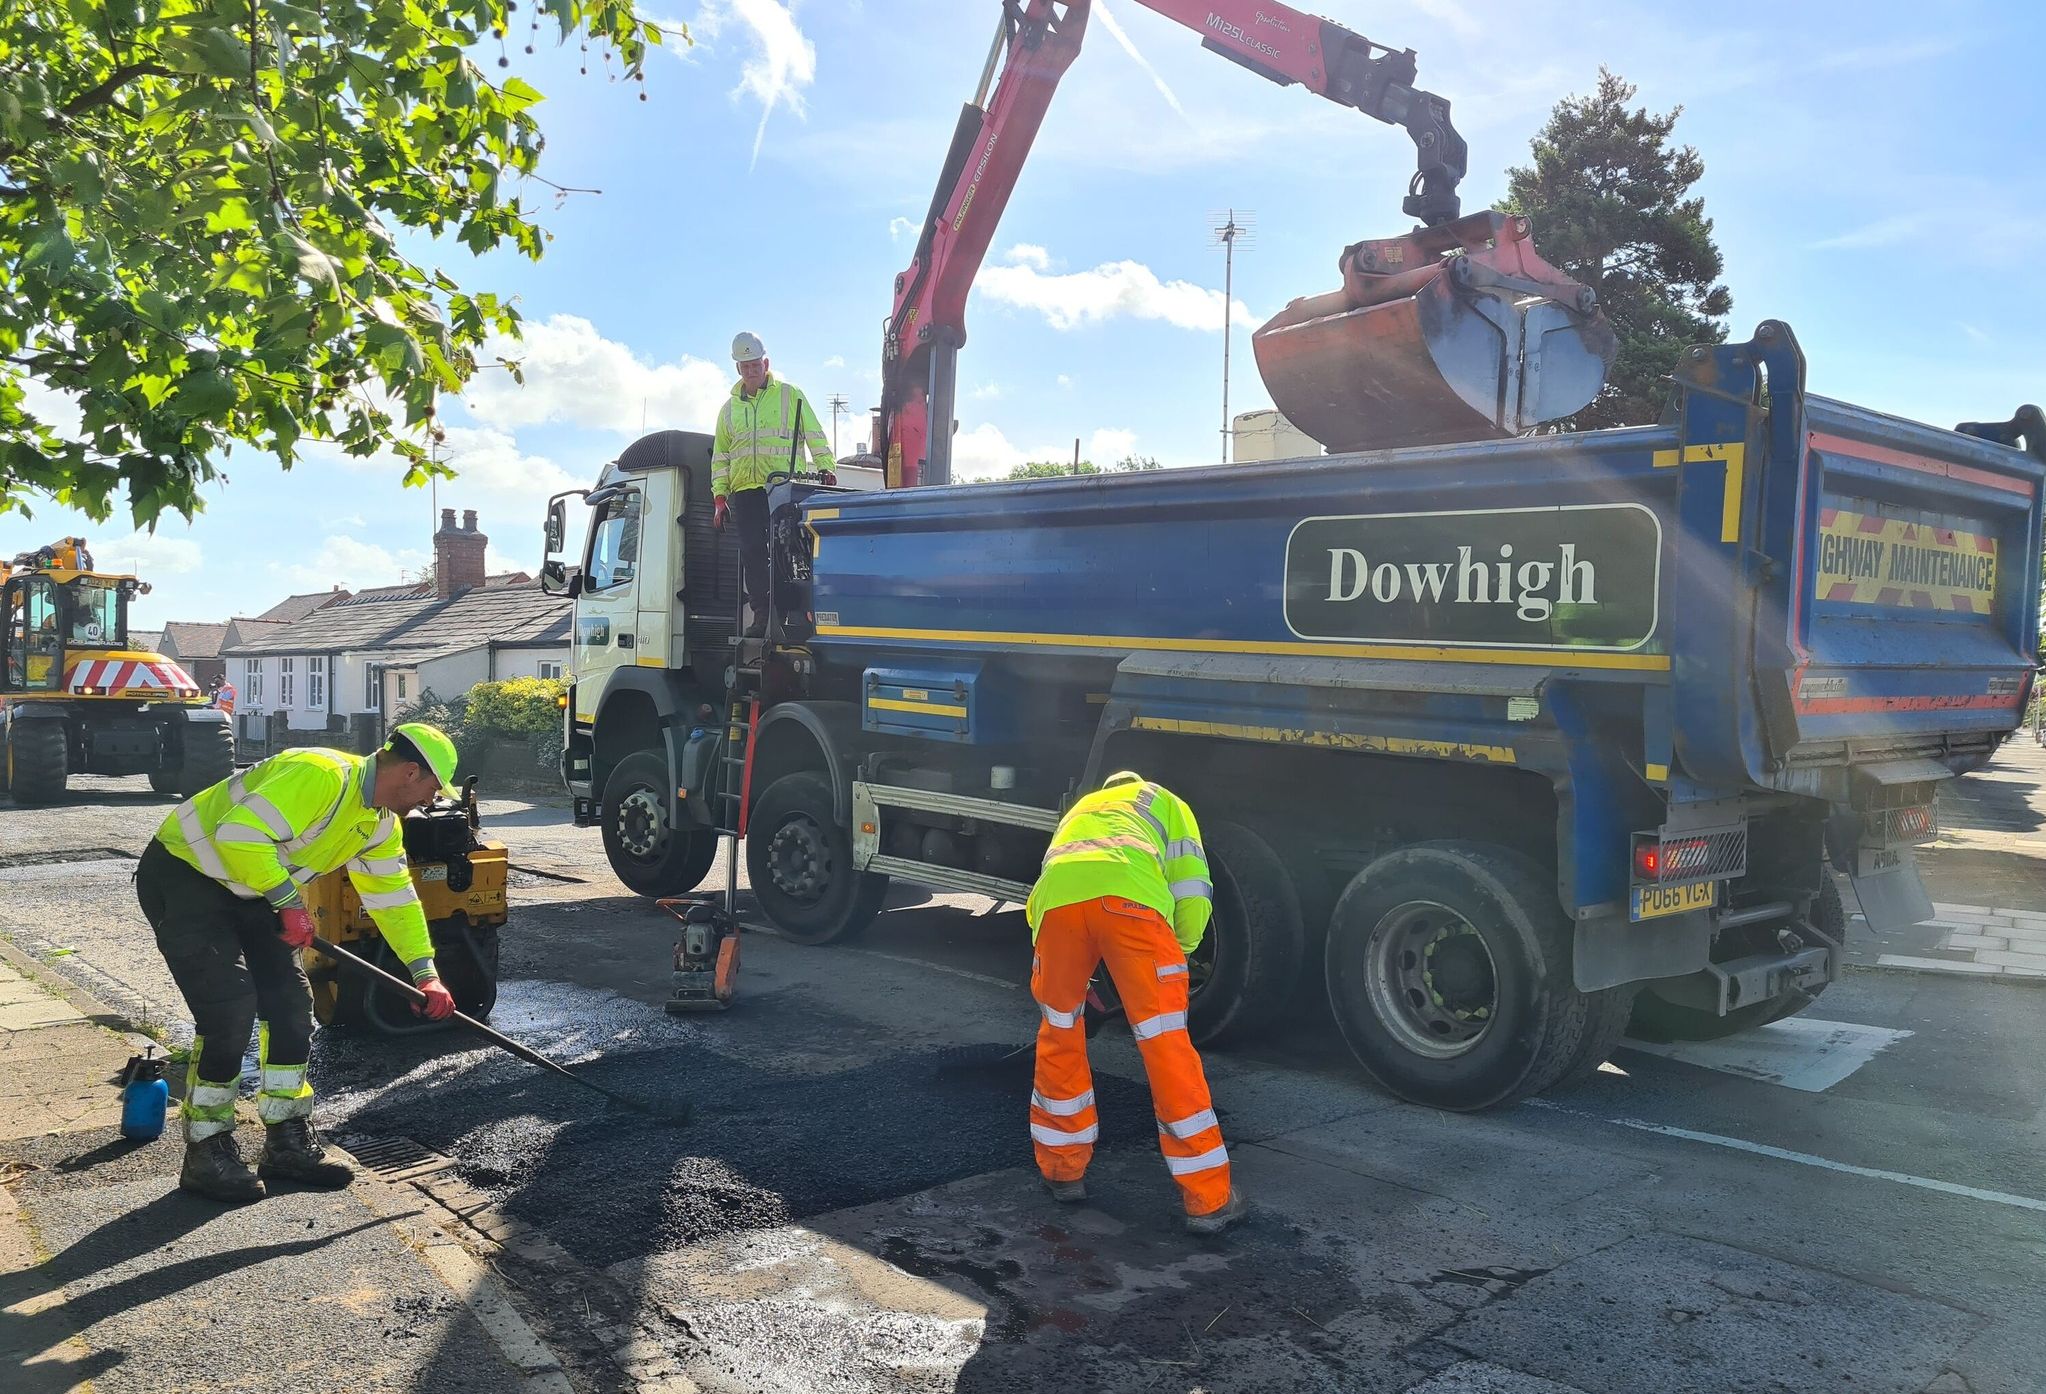 Dowhigh joined forces with the Daily Express and JCB to help the residents of Knob Hall Lane in Churchtown, which was plagued with dozens of potholes